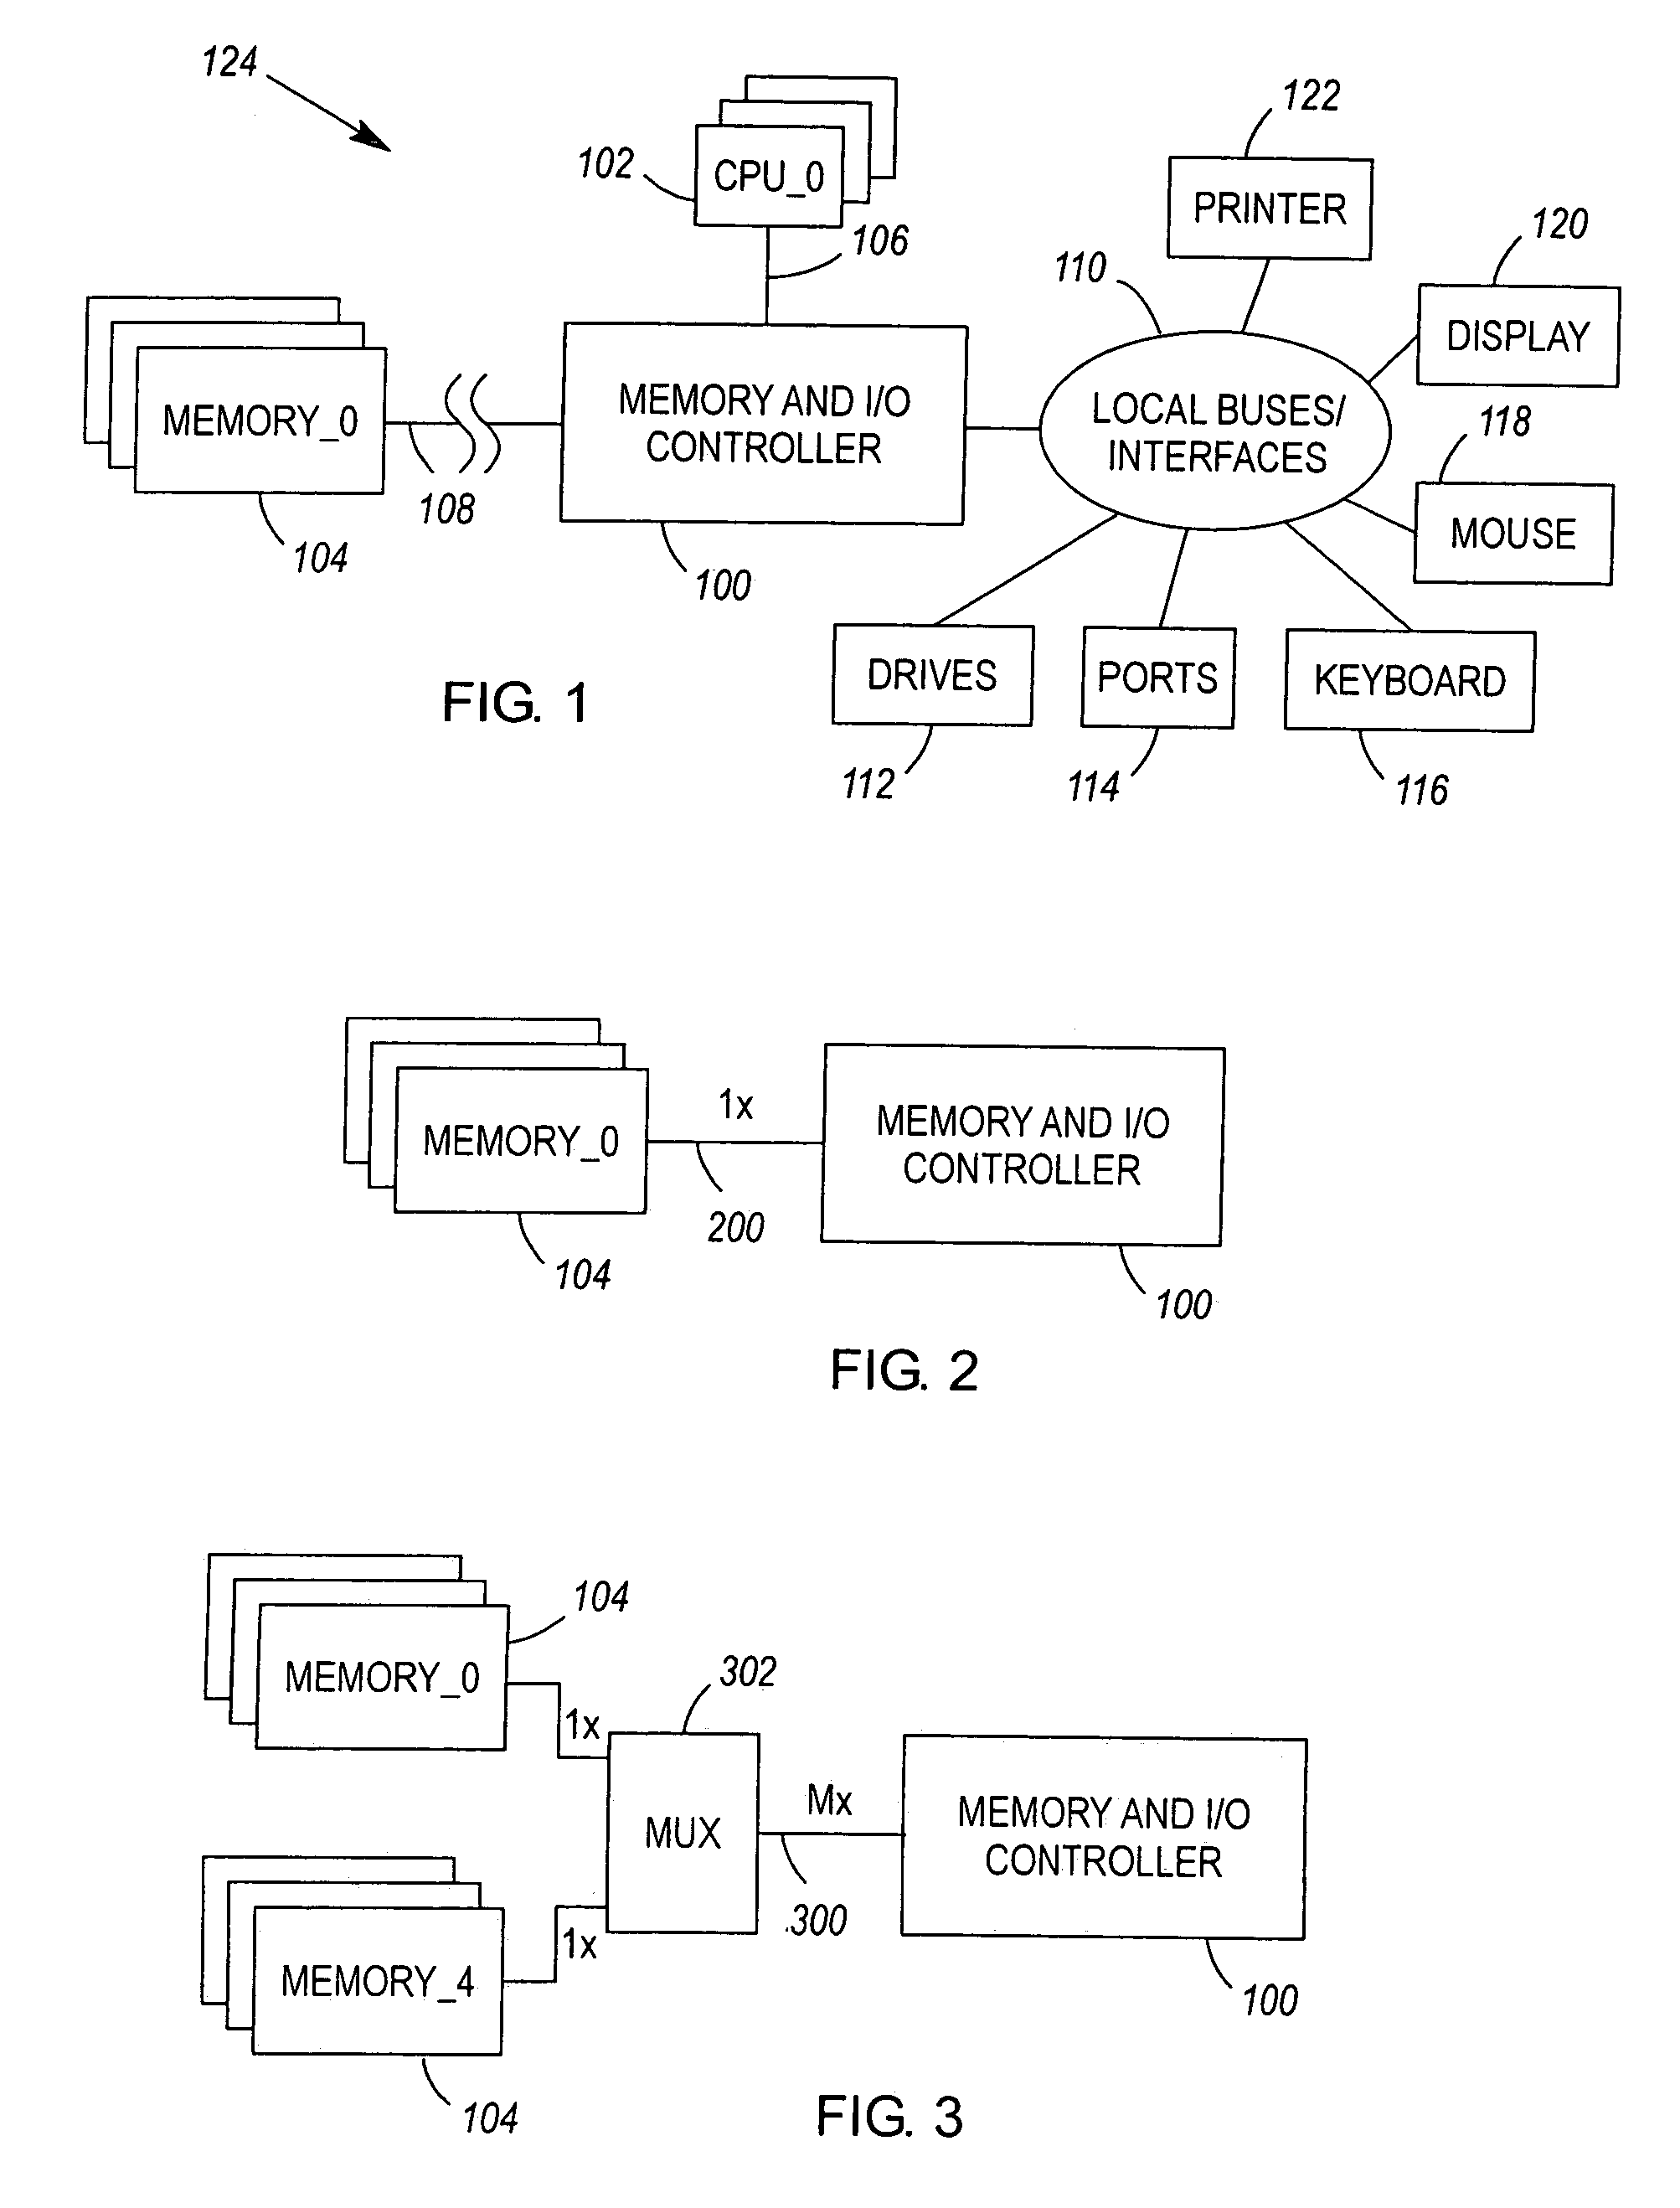 Memory controller having receiver circuitry capable of alternately generating one or more data streams as data is received at a data pad, in response to counts of strobe edges received at a strobe pad